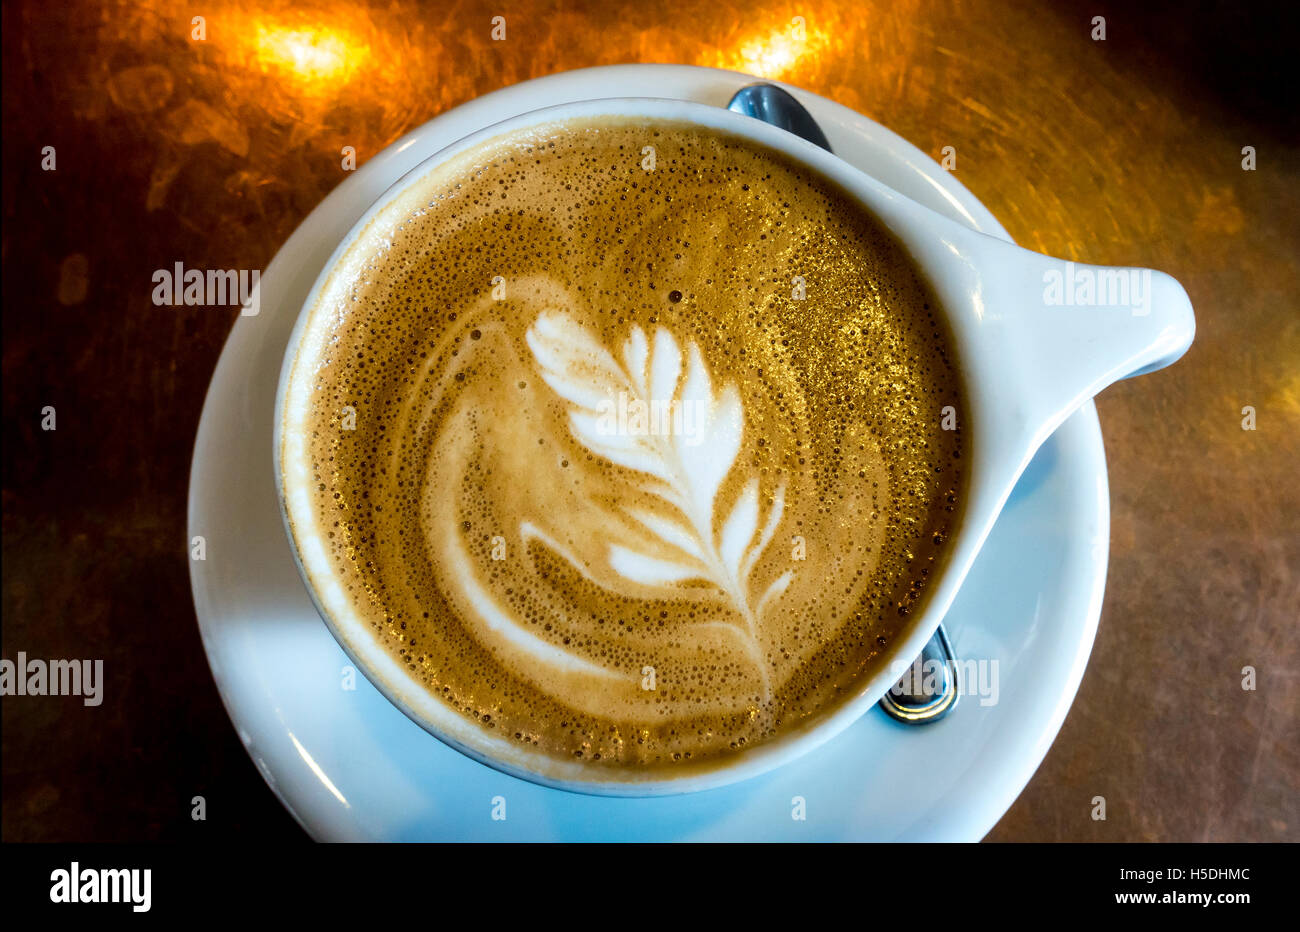 A cappuccino in a white cup Stock Photo